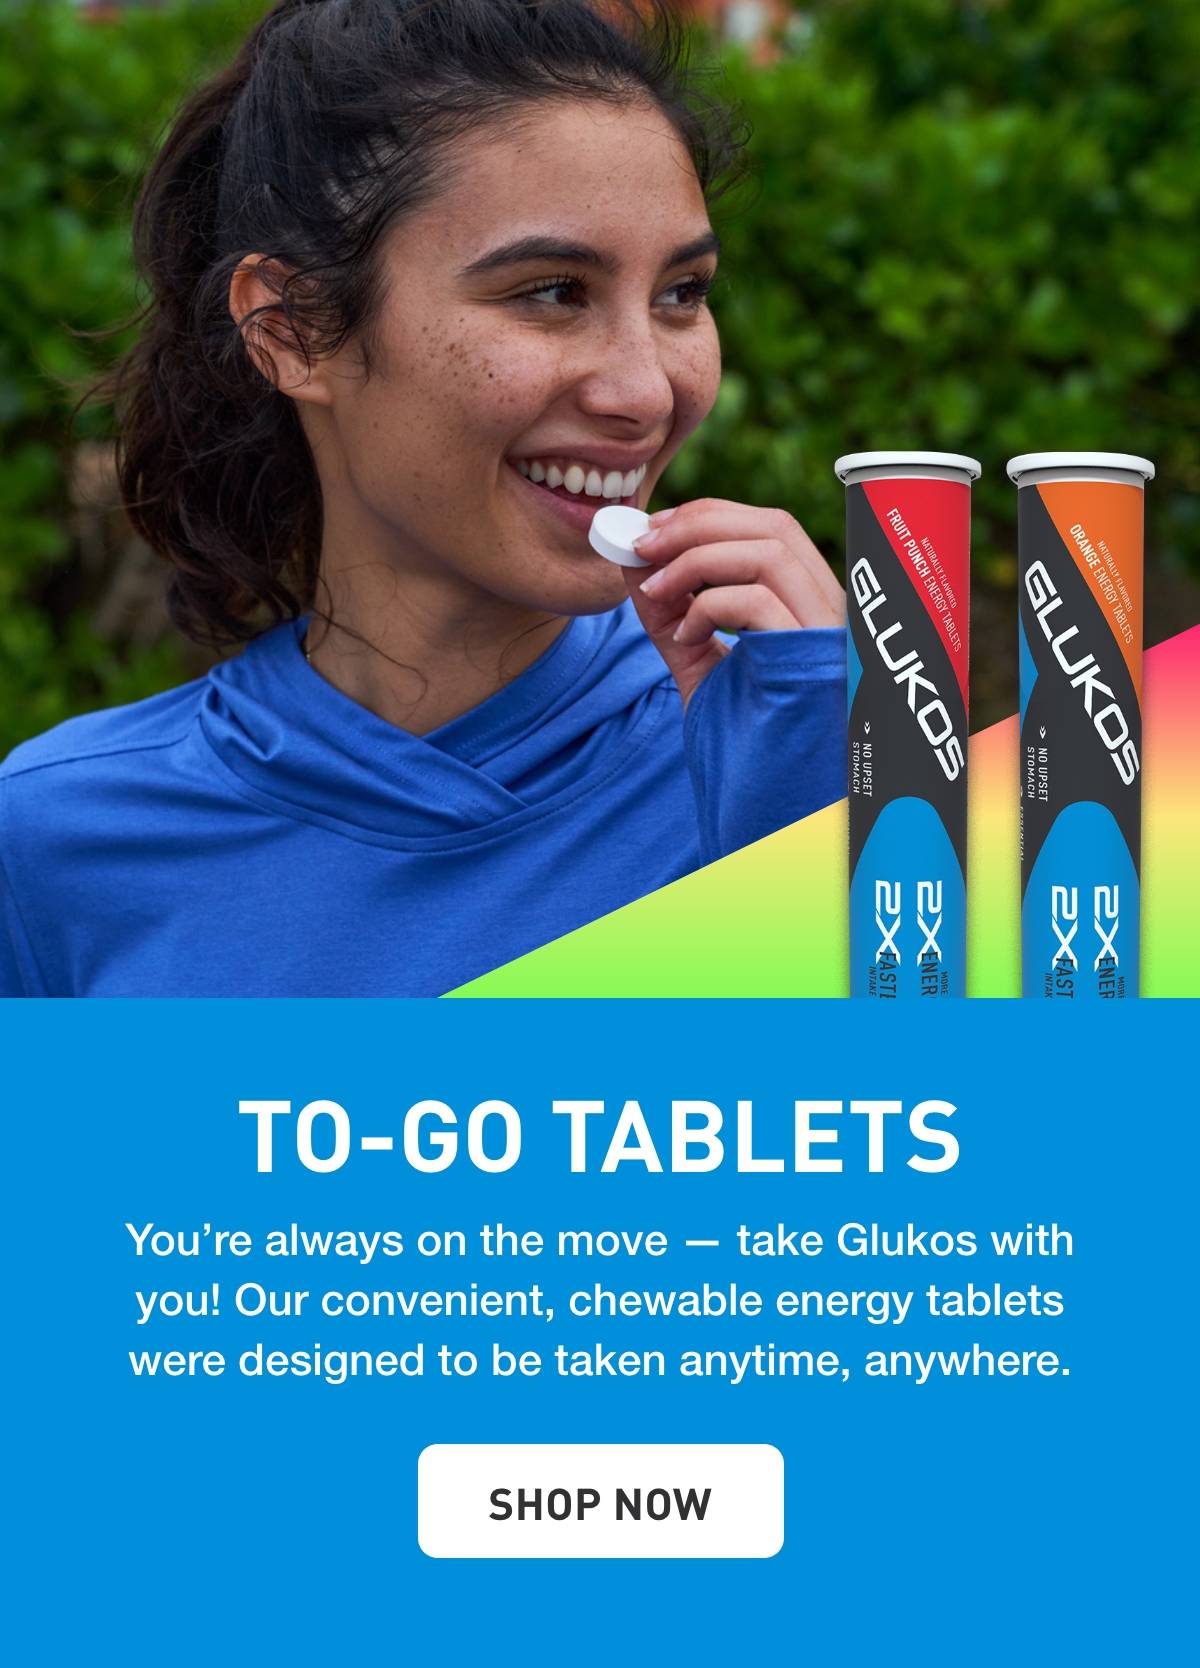 To-Go Tablets - You're always on the move - take Glukos with you! Our convenient, chewably energy tablets were designed to be taken anytime, anywhere. | SHOP NOW